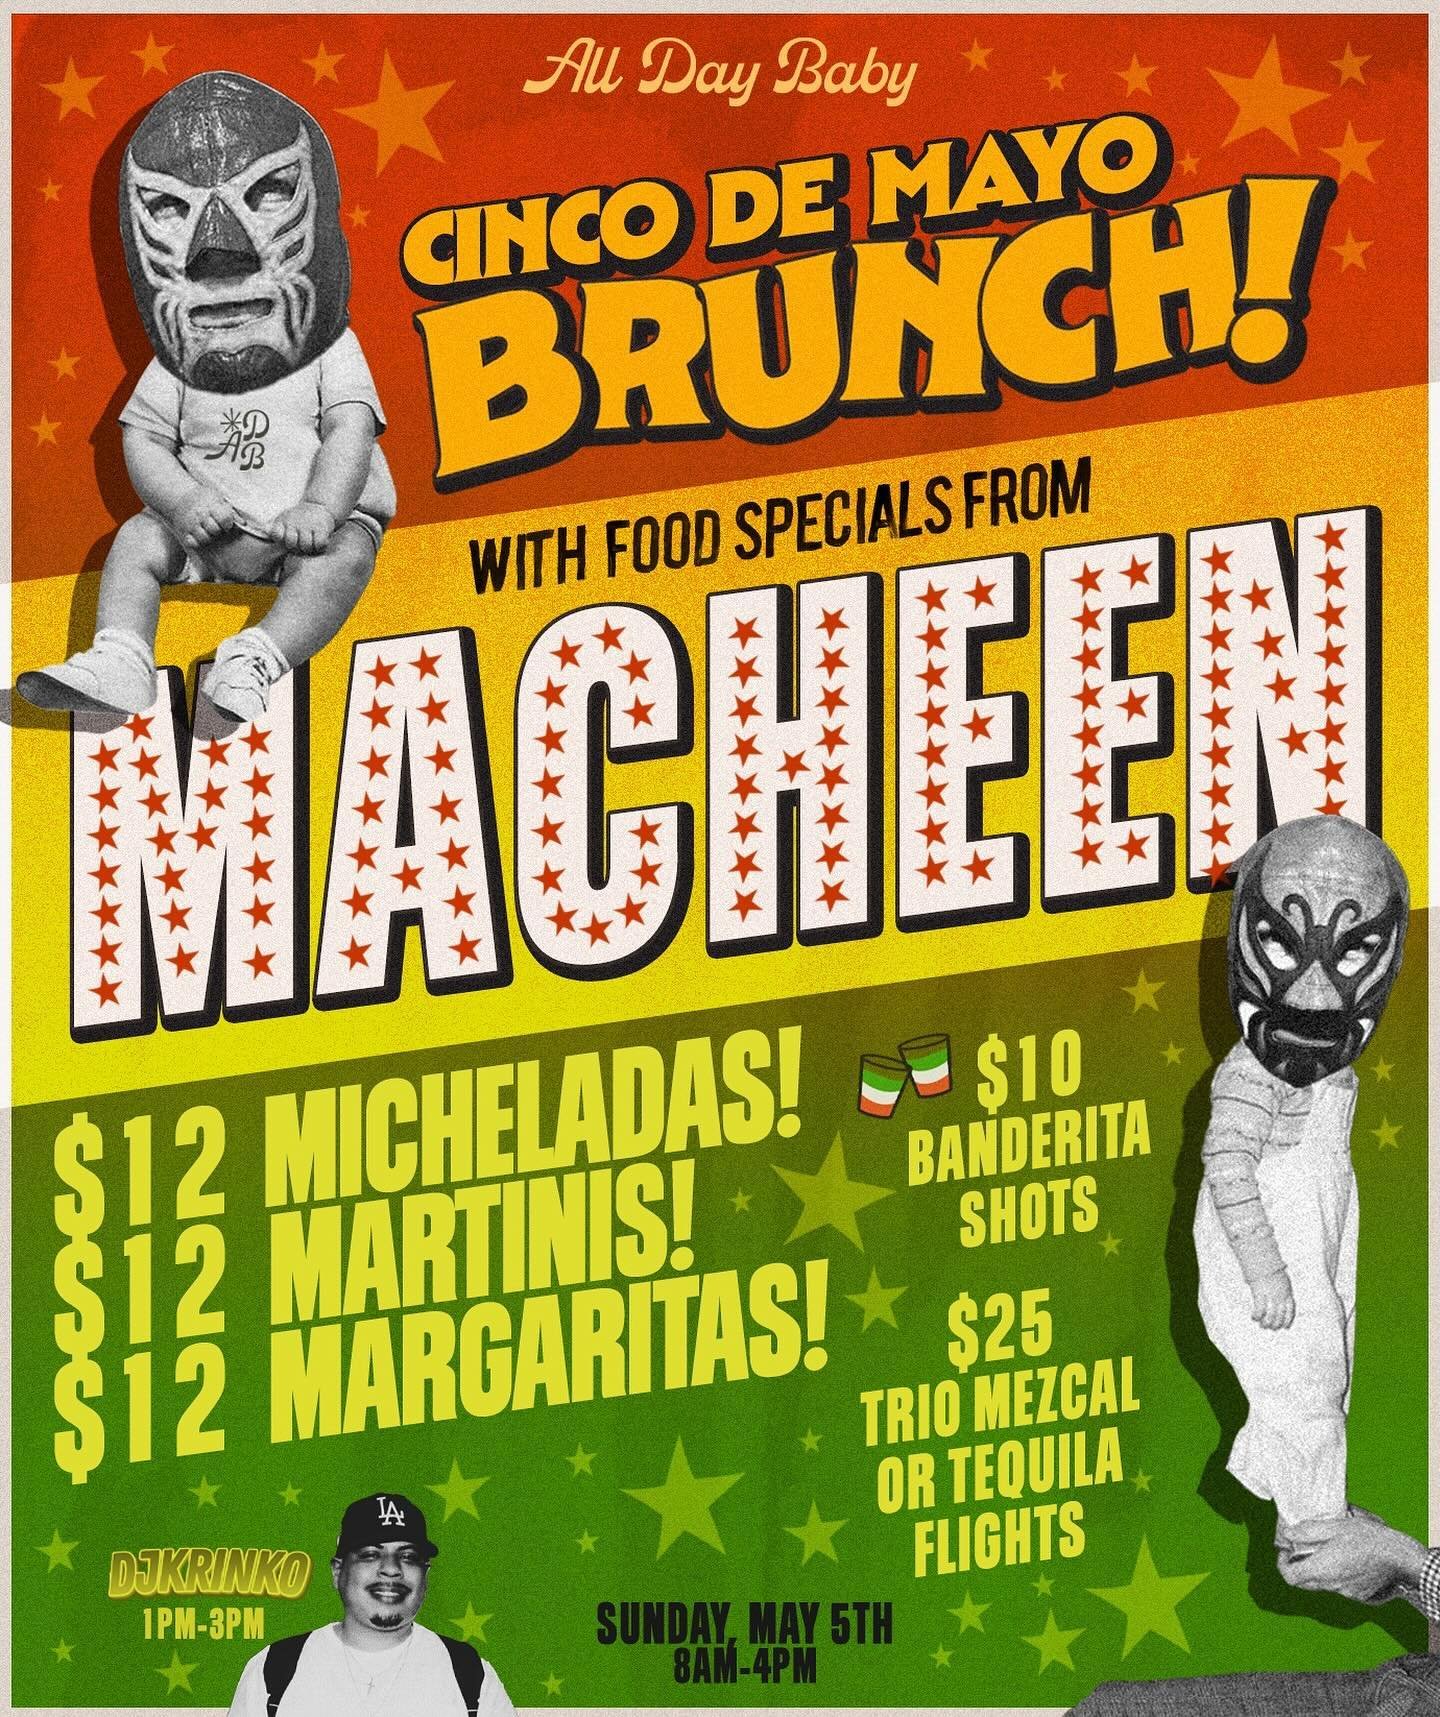 We love Sundays and finally Cinco de Mayo is landing on one &mdash; SO LET&rsquo;S BRUNCH

Just for the day, we welcome the very talented Chef @jonathan_madeforchefs of @_macheen_ , who&rsquo;s gonna add some of his flavor to the ADB cuisine (fried o